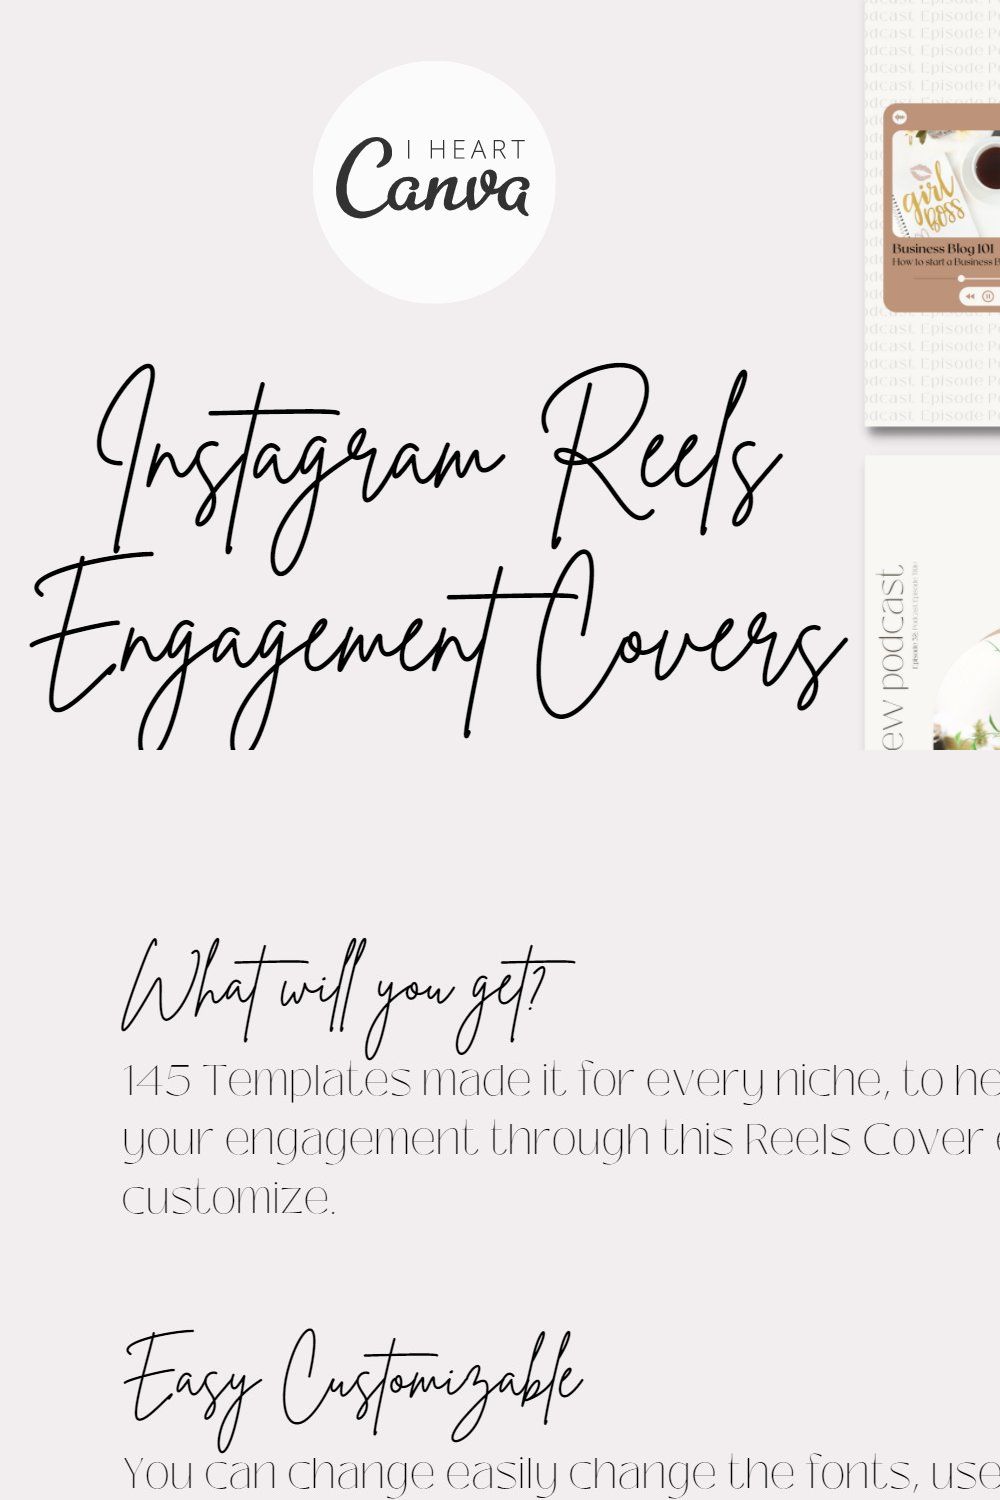 Instagram Reels Engagement Covers pinterest preview image.